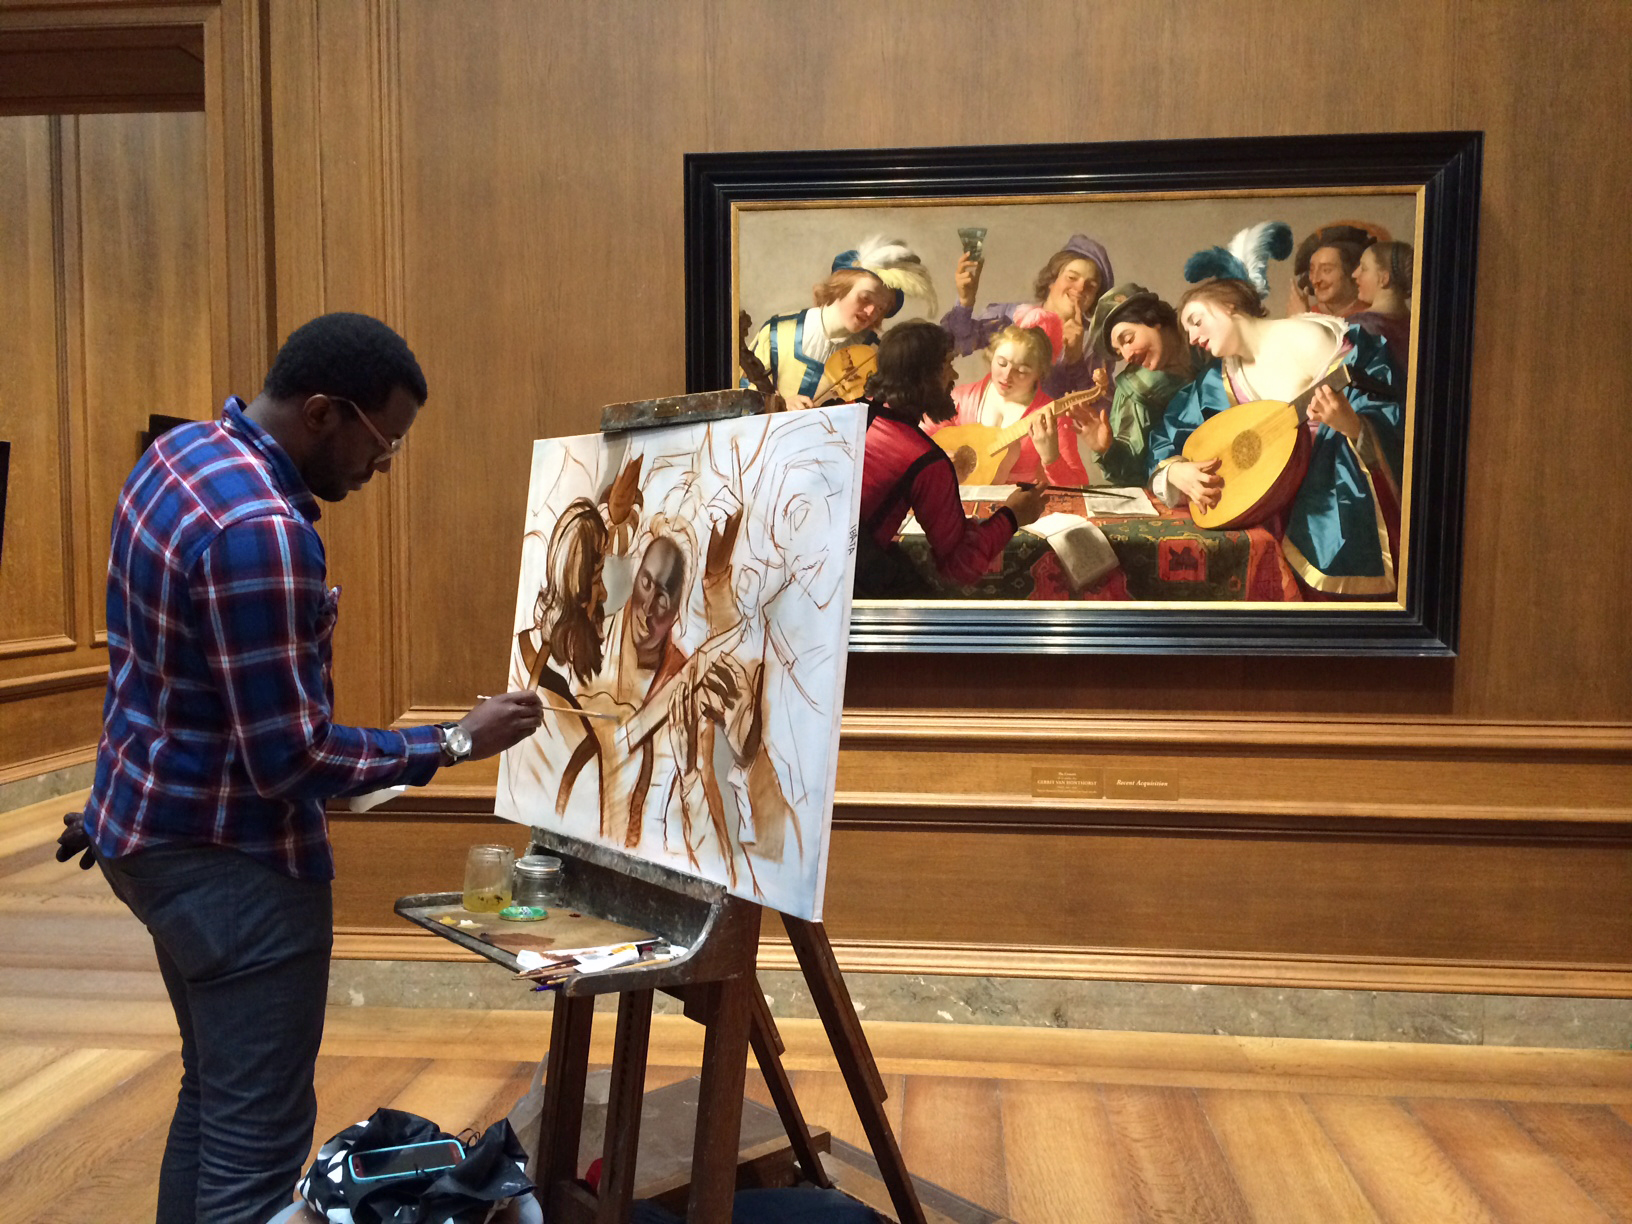 Copyists have all levels of art training. David Ibata, an artist who teaches art classes, attended the Corcoran School of the Arts and the New York Academy of Art. 